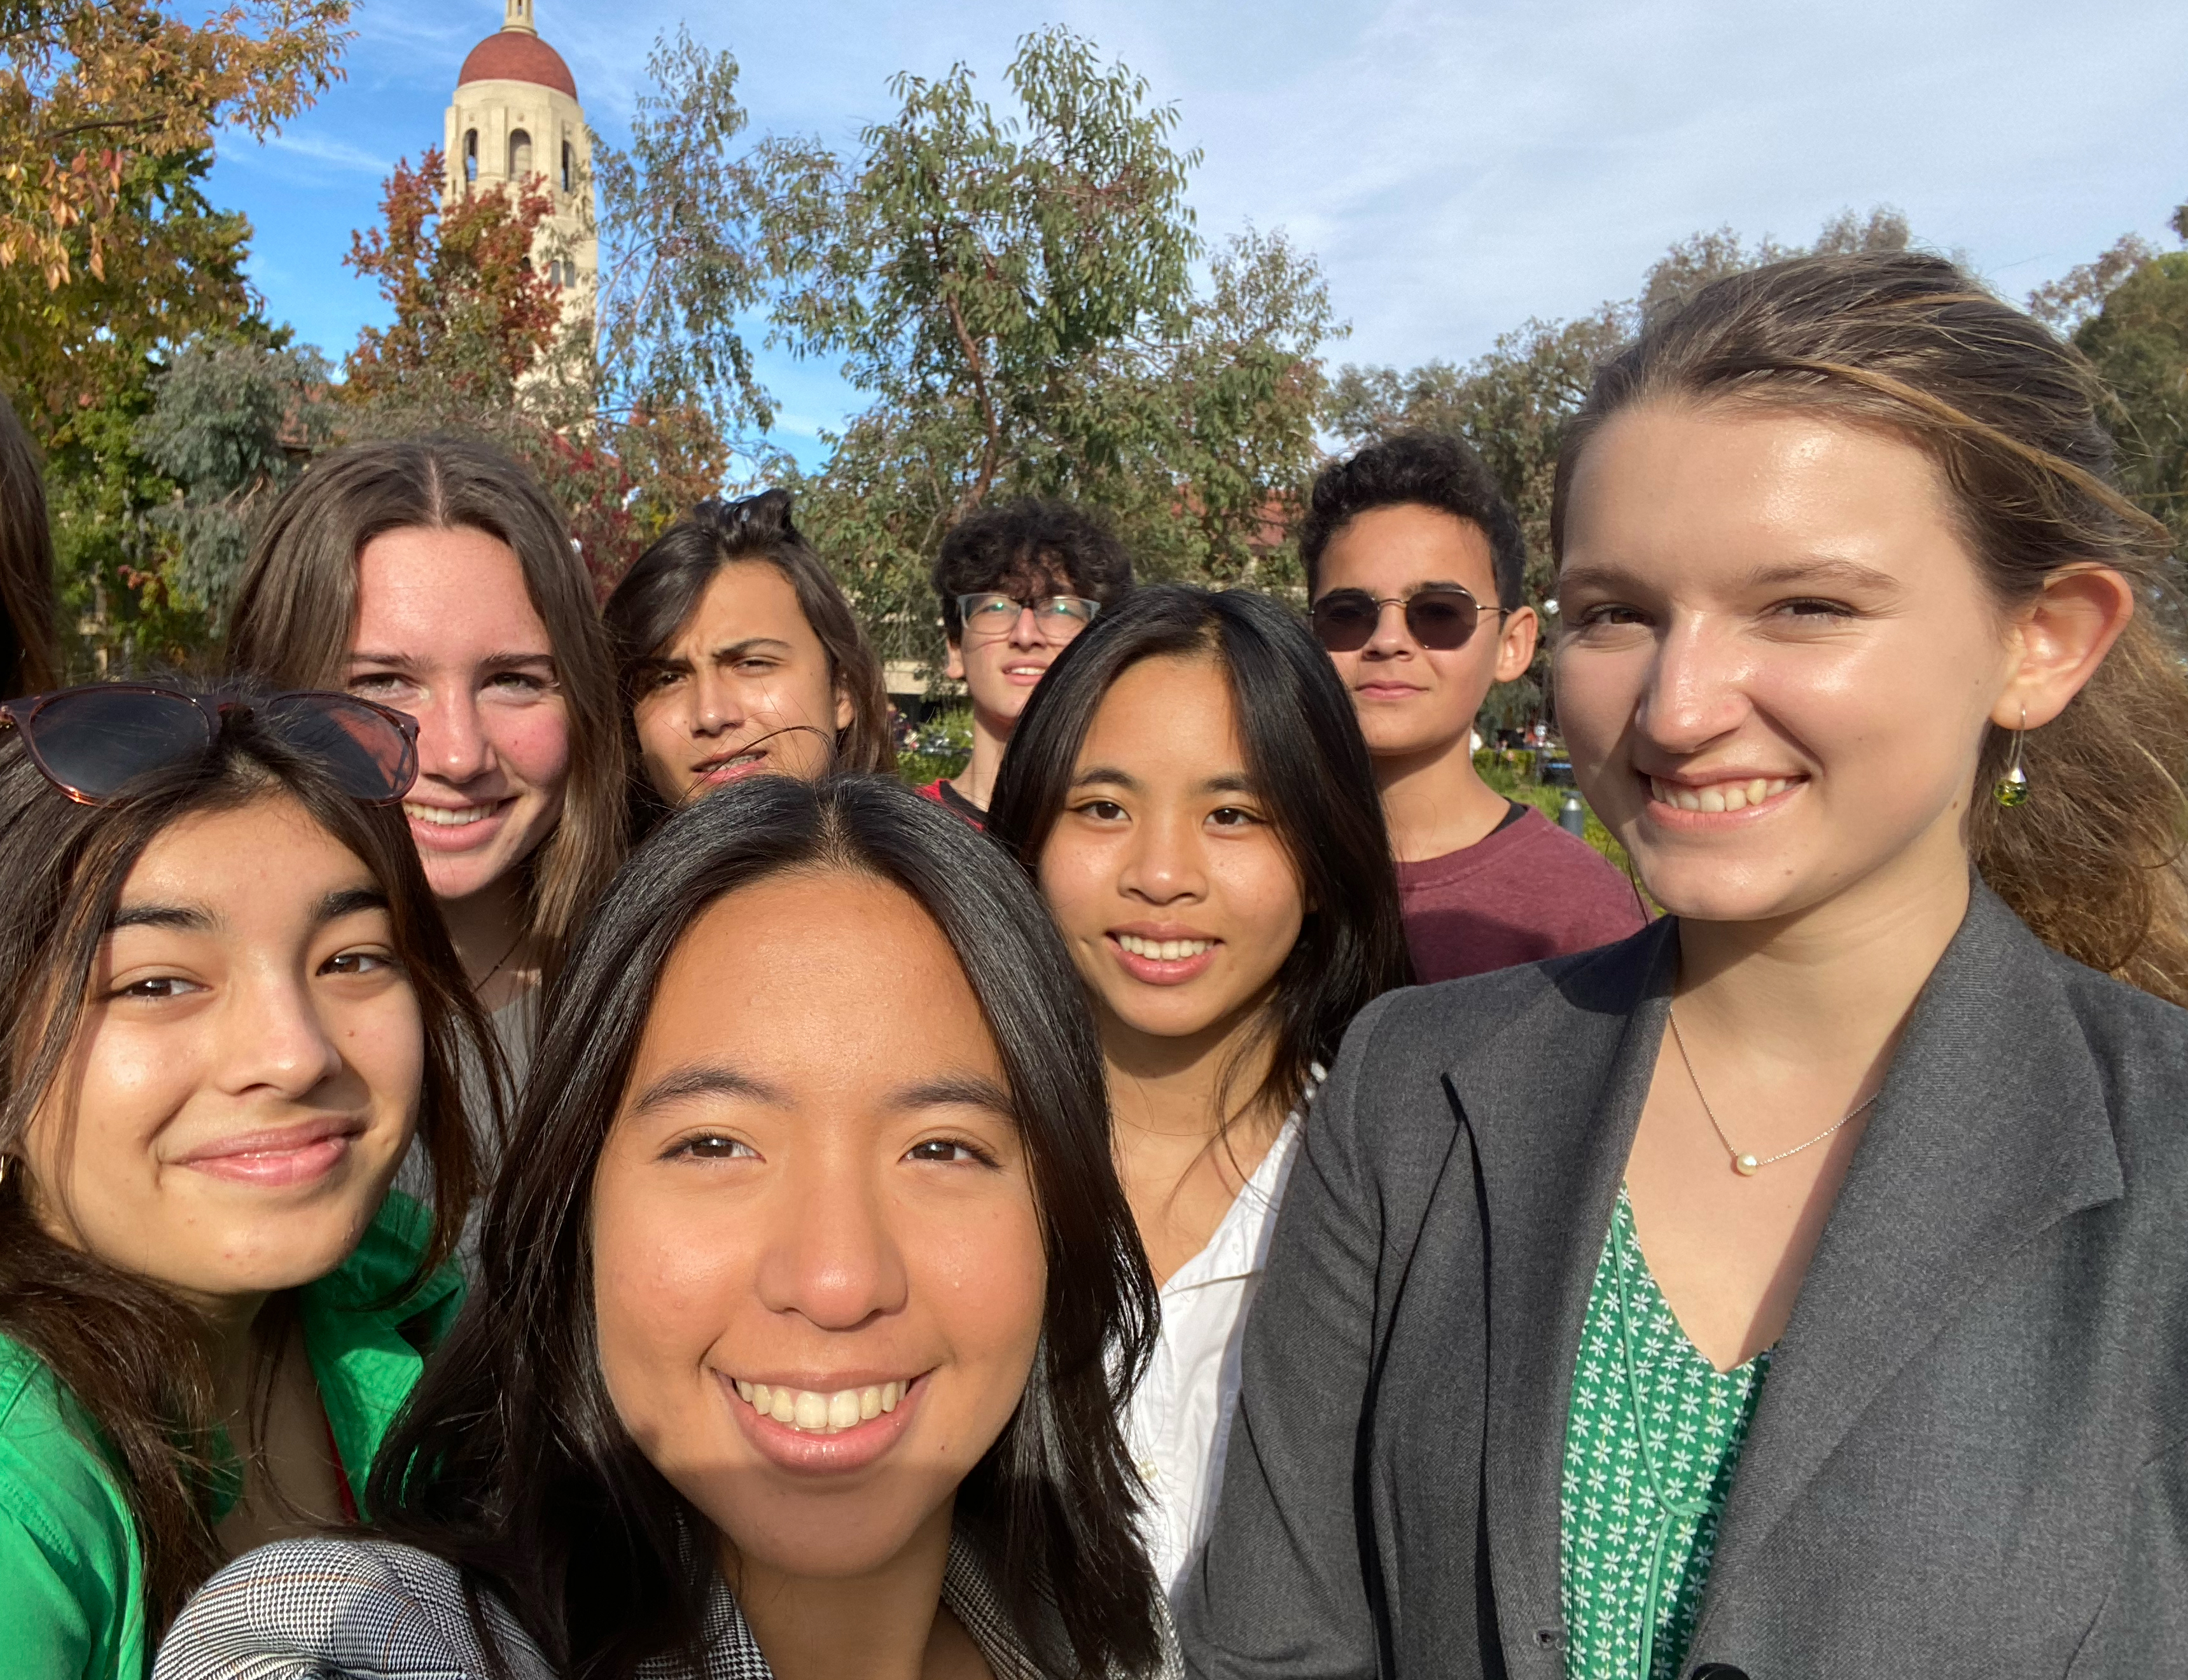 INTL's Model UN team photo in front of the Hoover Tower on the Stanford Campus.